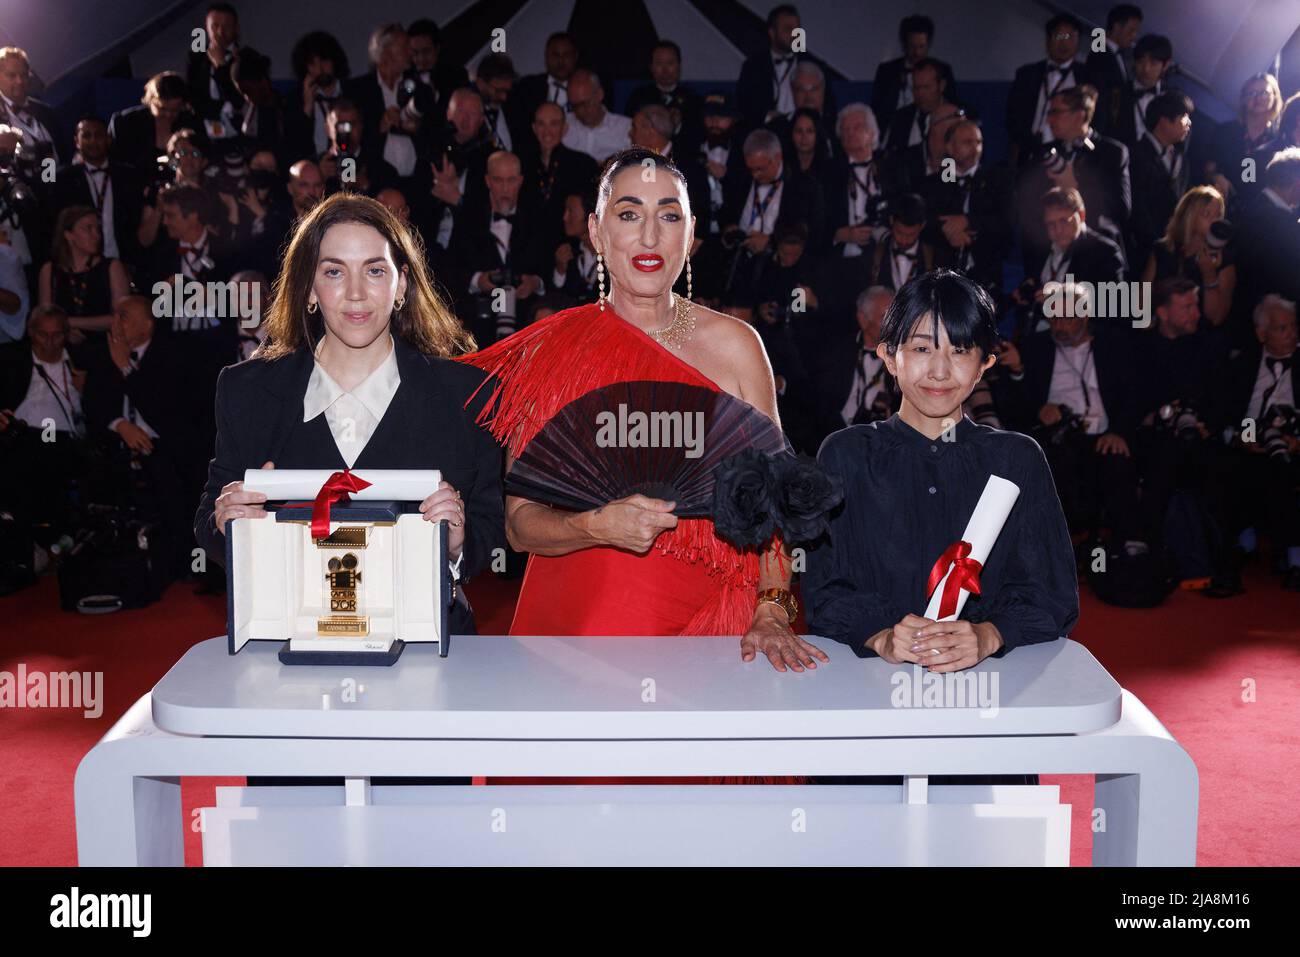 President of the Camera d'or jury, Rossy De Palma (C) poses with Director Chie Hayakawa (L) who won the Special Mention for a first film winner for 'Plan 75' and Director Gina Gammell (R) who won the Caméra d’or Award for a first film for 'War Pony' during the 75th annual Cannes film festival at Palais des Festivals on May 28, 2022 in Cannes, France. Photo by David Boyer/ABACAPRESS.COM Stock Photo